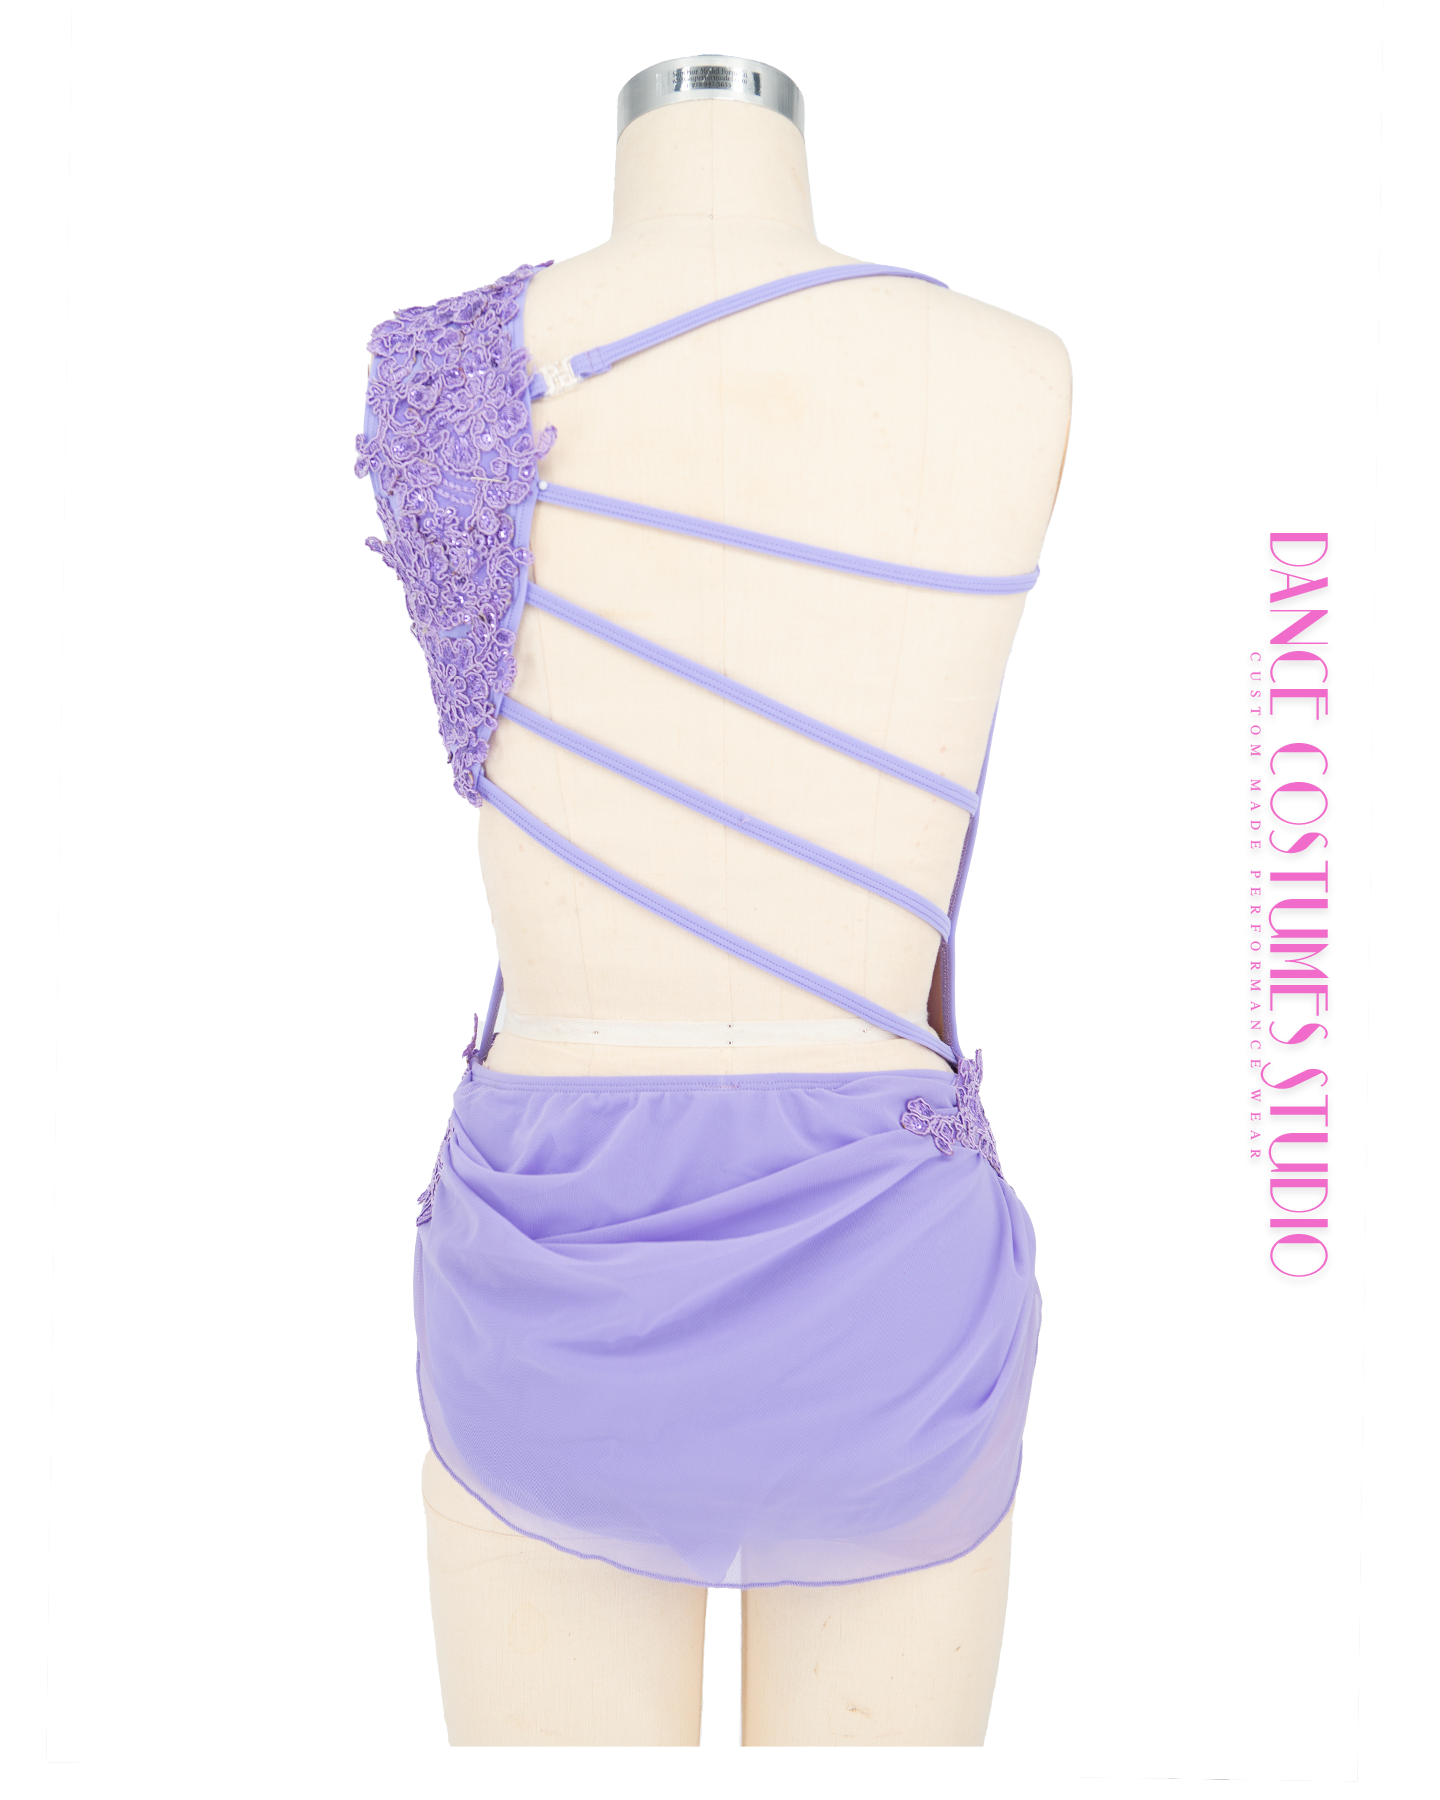 Giselle Contemporary Lyrical Dance Costume